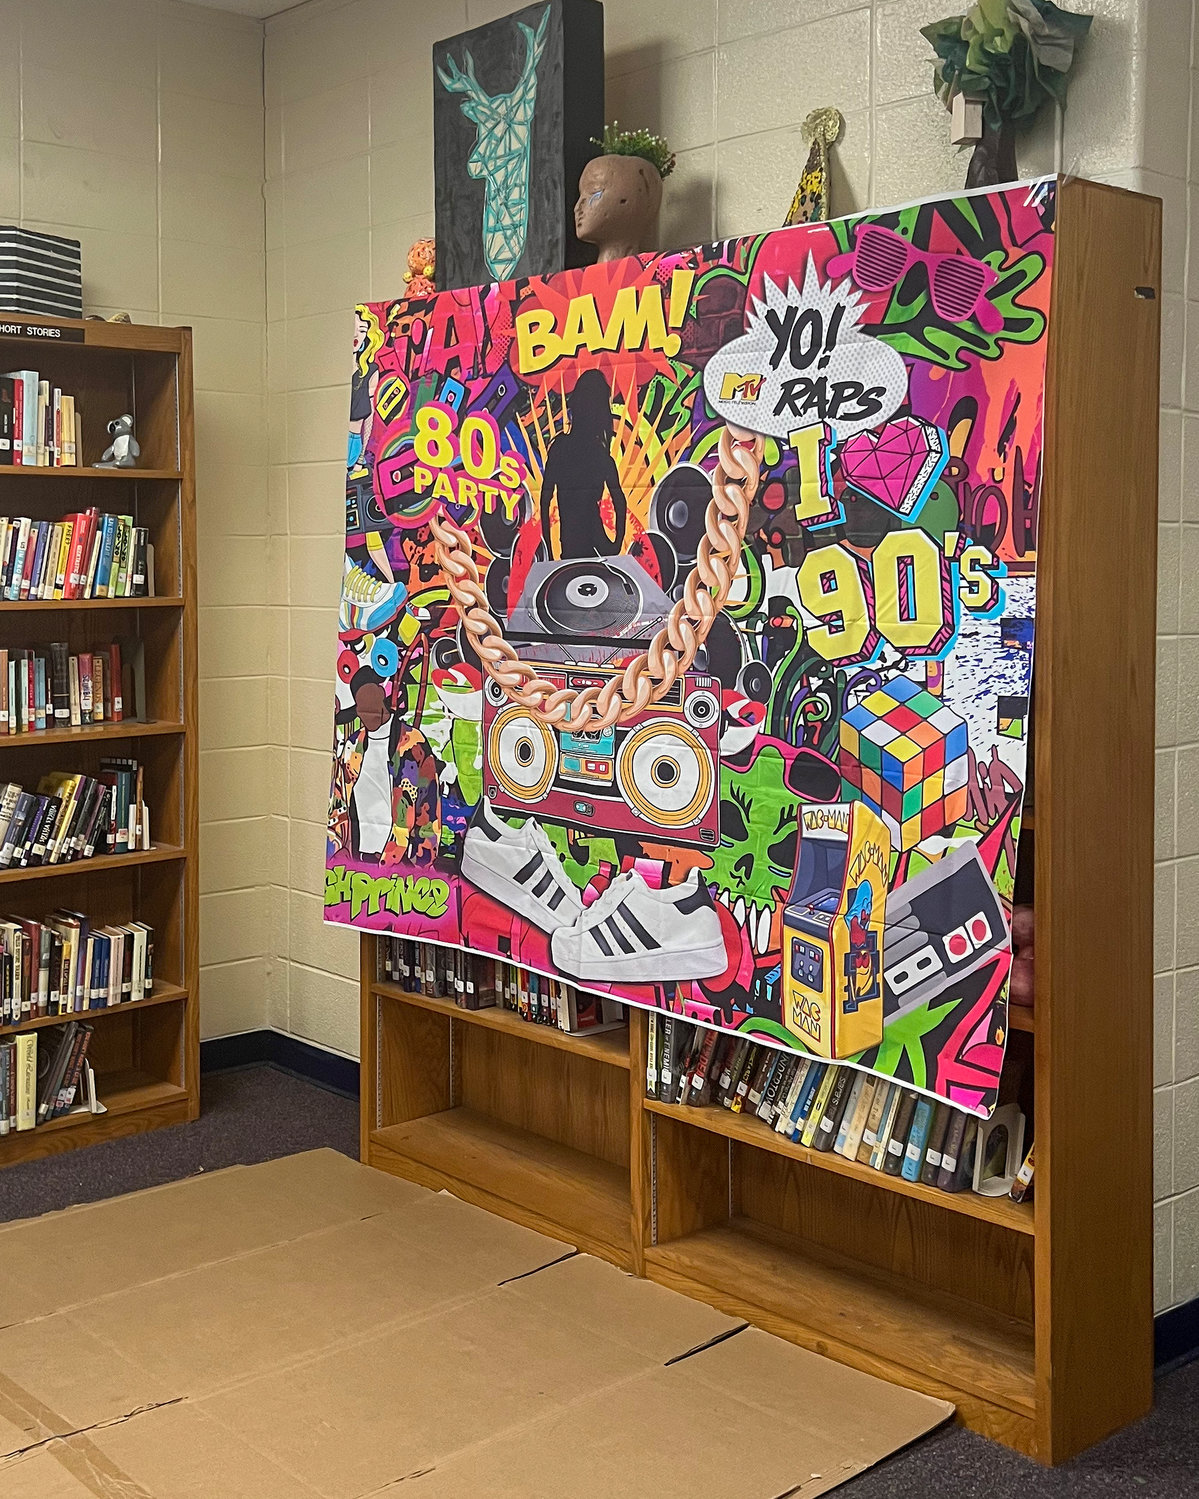 A backdrop where students posed to take pictures while wearing jewelry, hats, jackets and music props from the hip hop era. The cardboard on the floor was created for breakdancing.